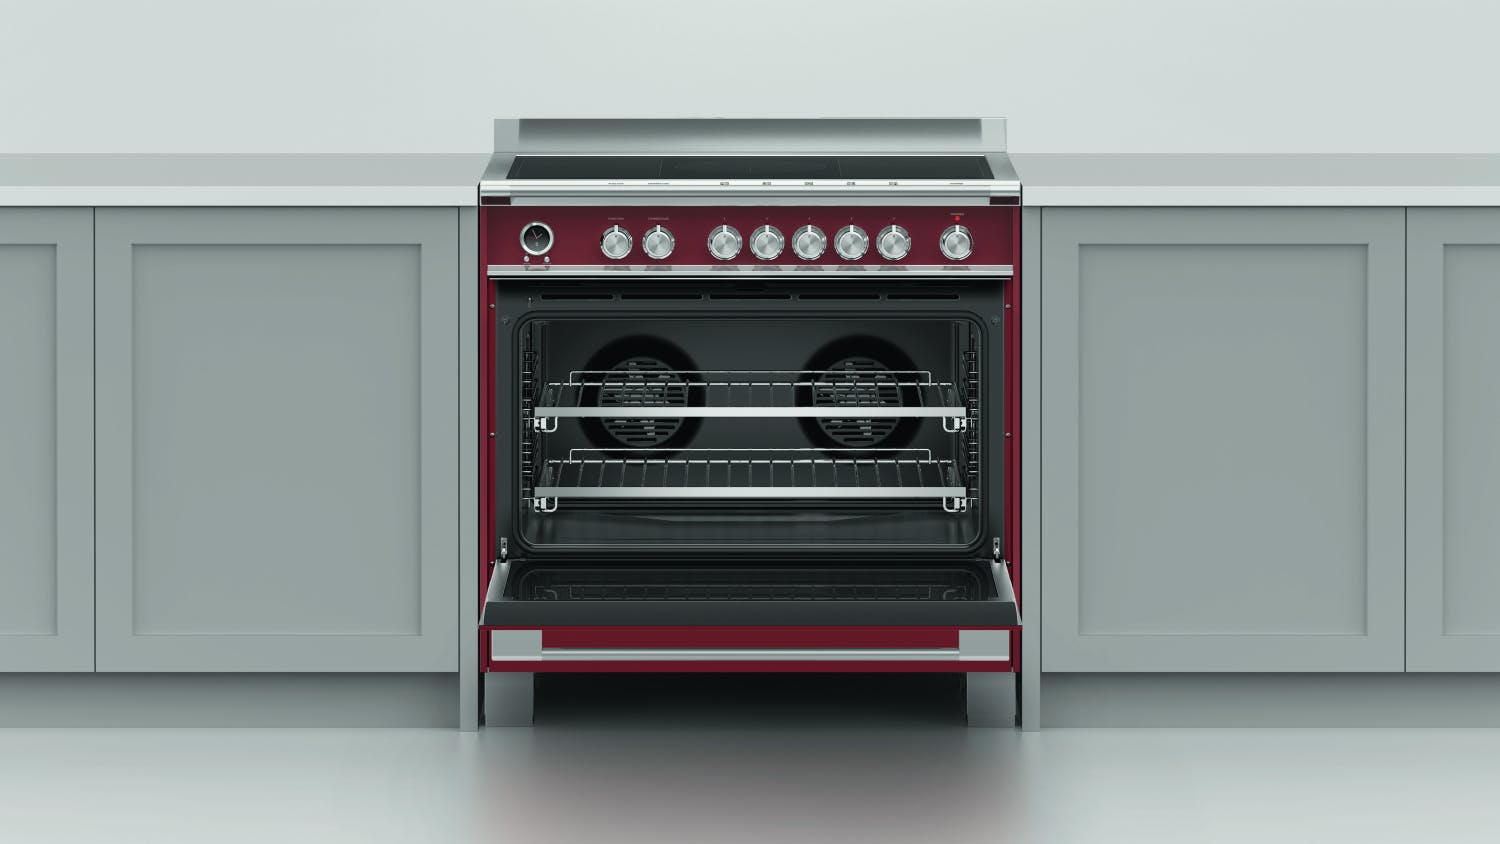 Fisher & Paykel 90cm Pyrolytic Freestanding Oven with Induction Cooktop - Red (Series 9/OR90SCI6R1)